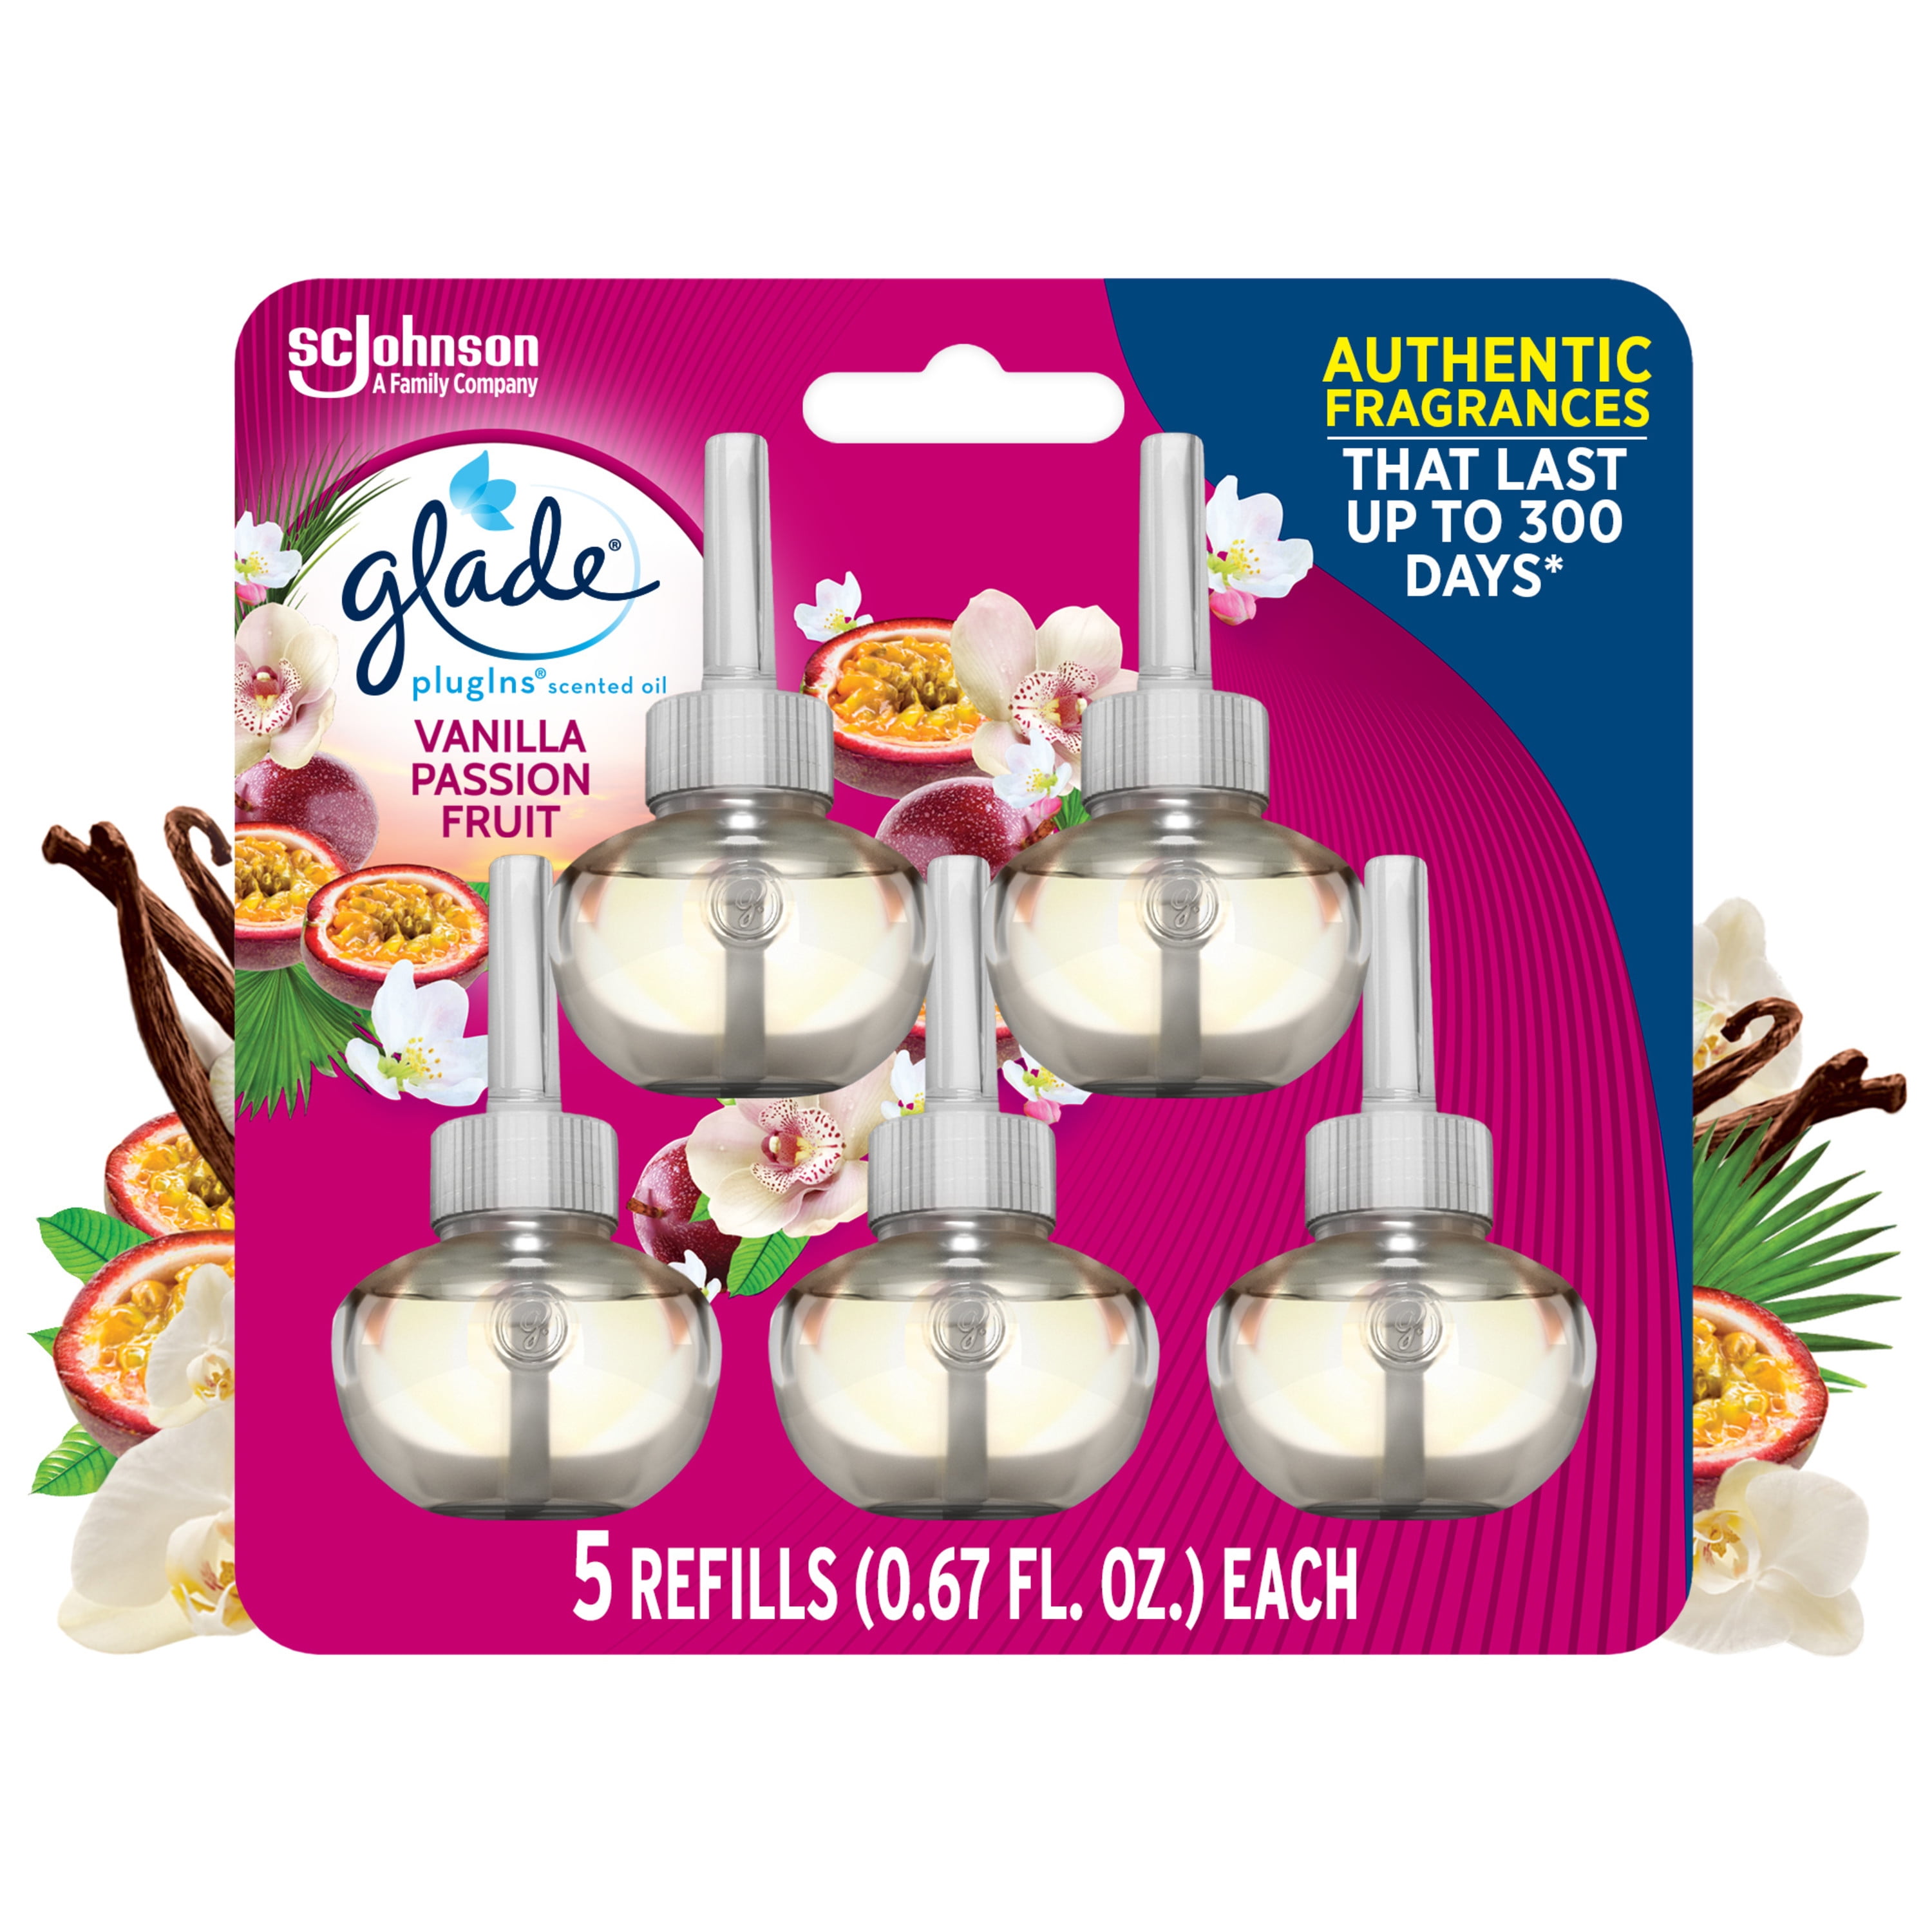 Glade Vanilla Passion Fruit PlugIns Scented Oil Fragrance Infused